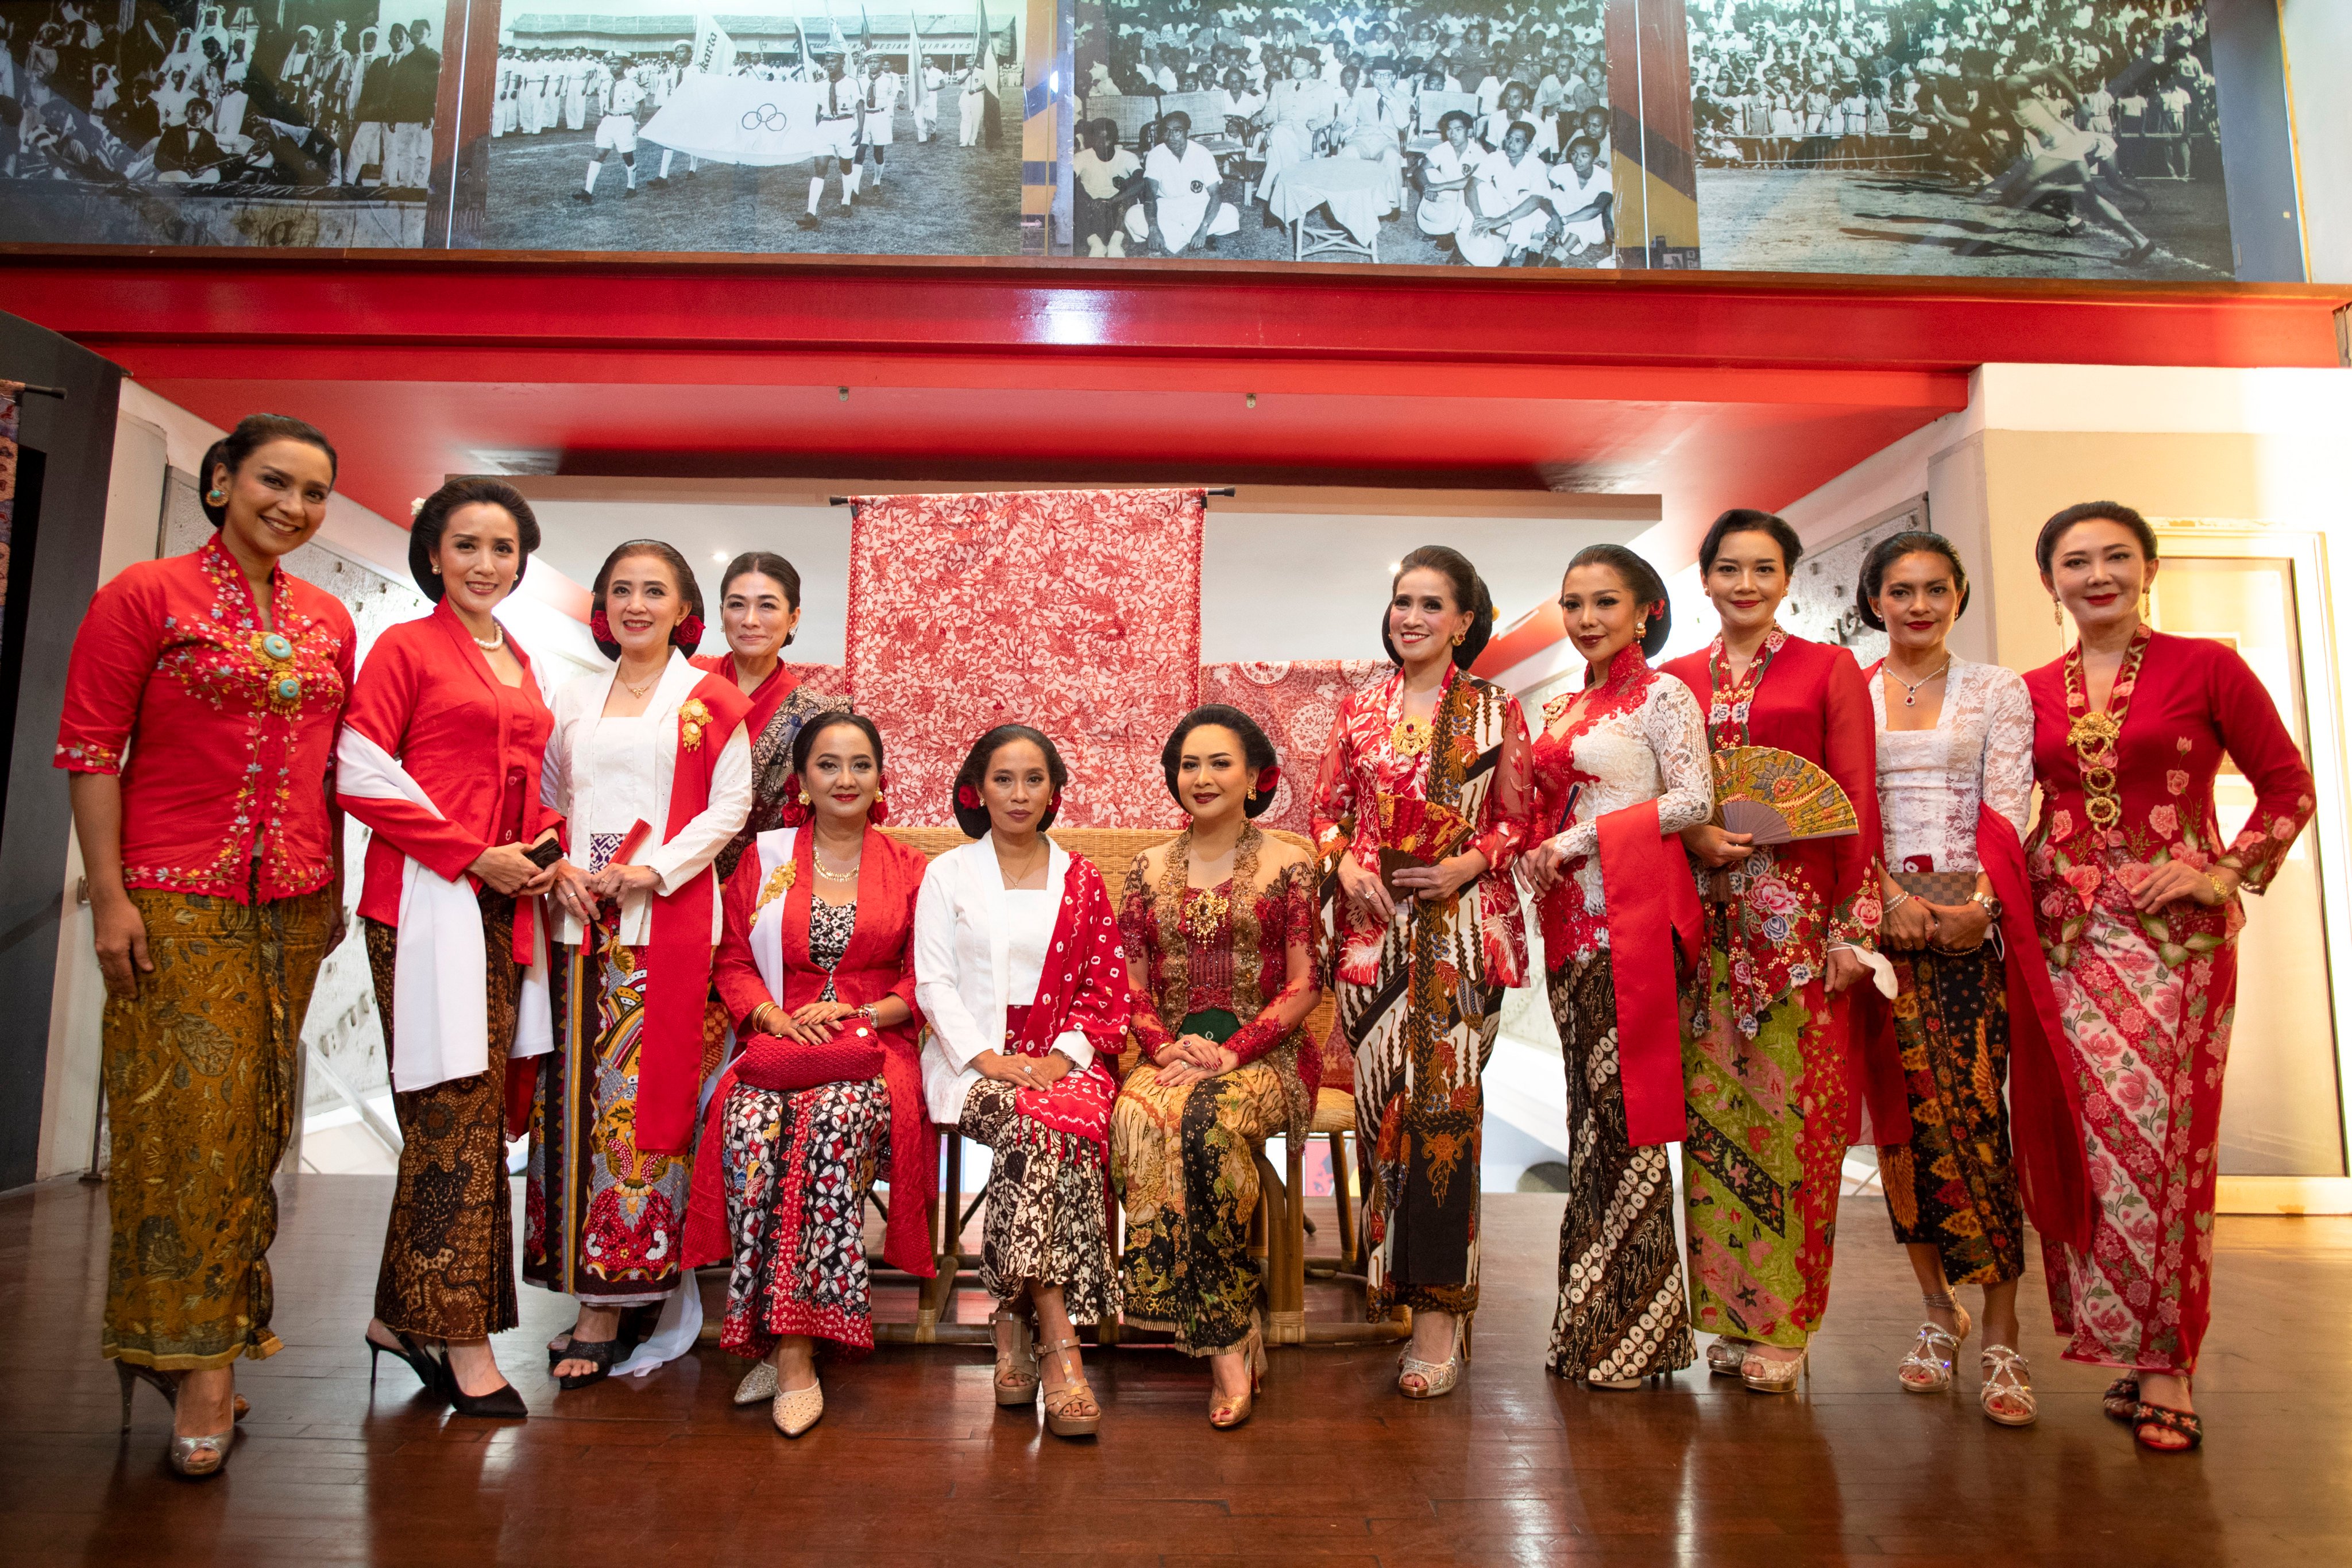 Women from the Perempuan Peduli Budaya (Women for Cultural Preservation) group at one of their public functions. Photo: Handout